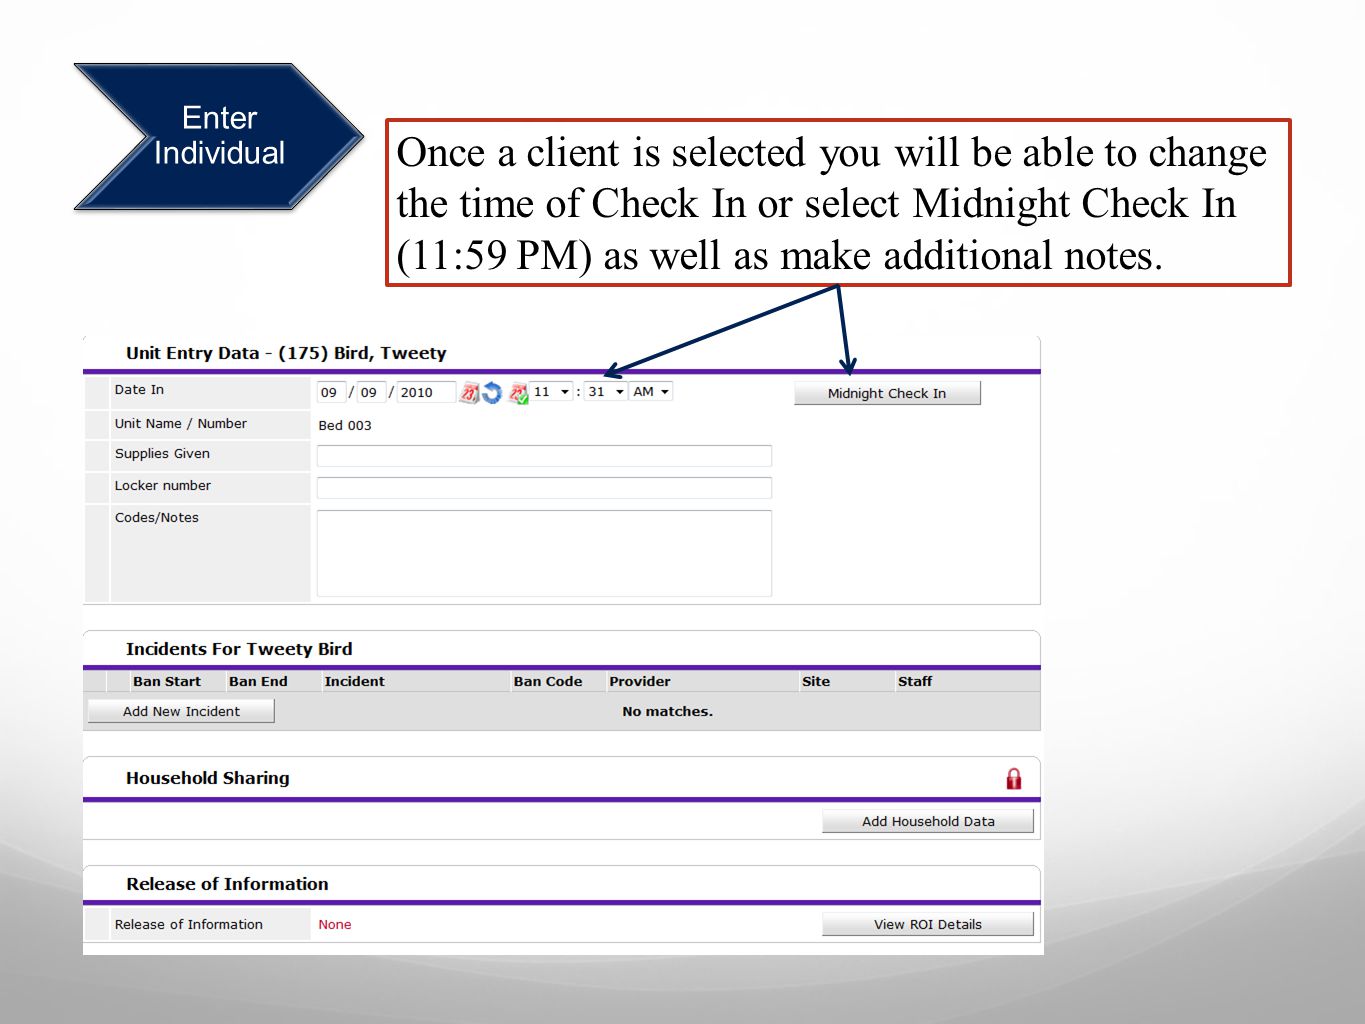 Enter Individual Once a client is selected you will be able to change the time of Check In or select Midnight Check In (11:59 PM) as well as make additional notes.